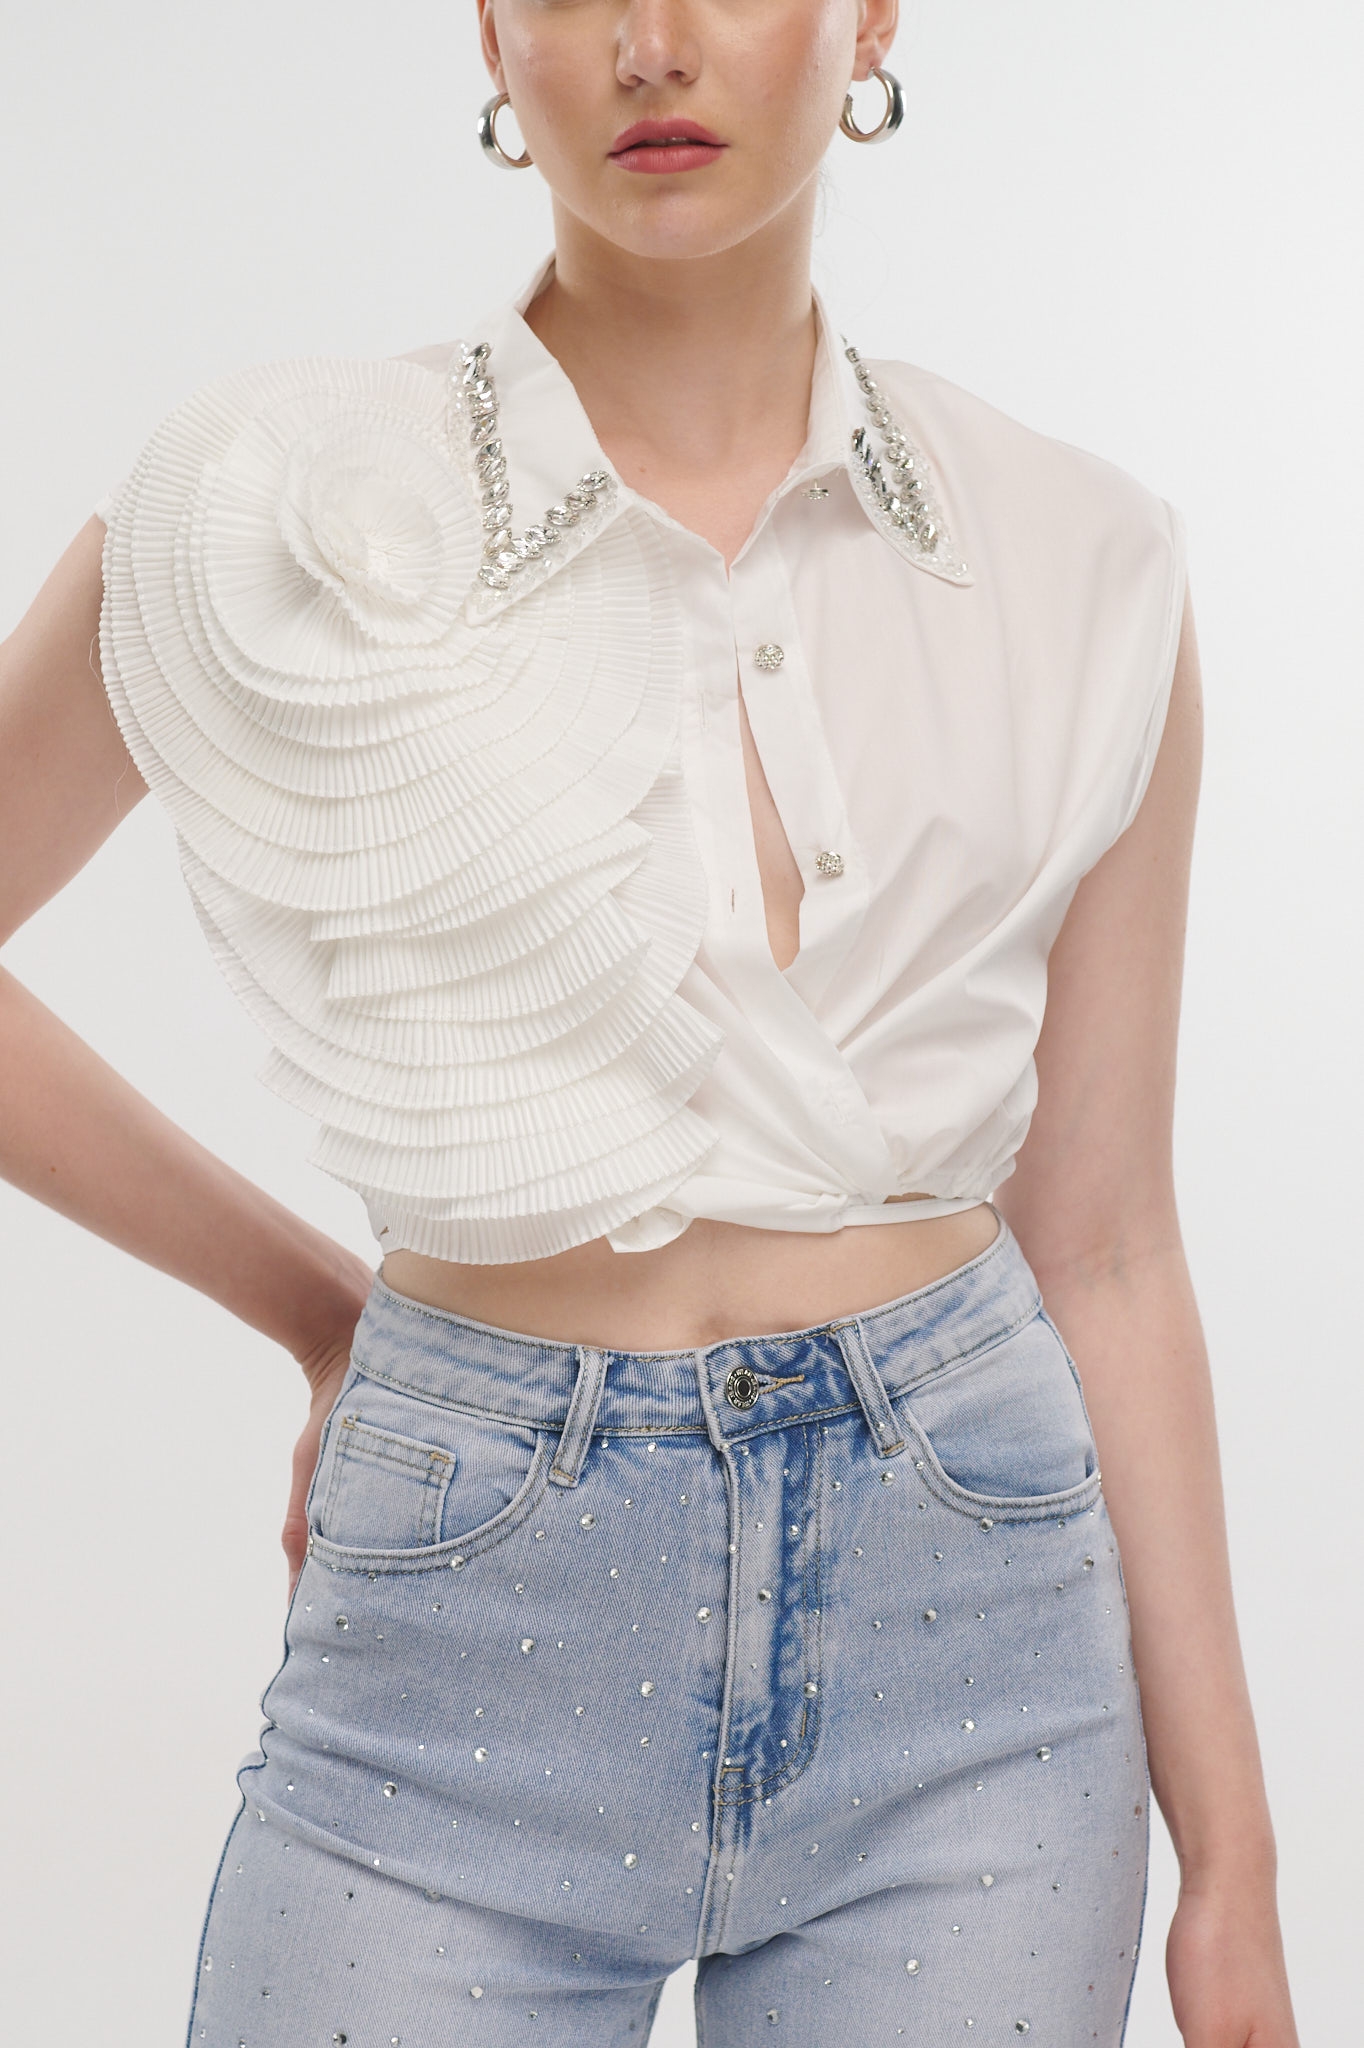 Crop Shirt With Rhinestones And 3D Flower